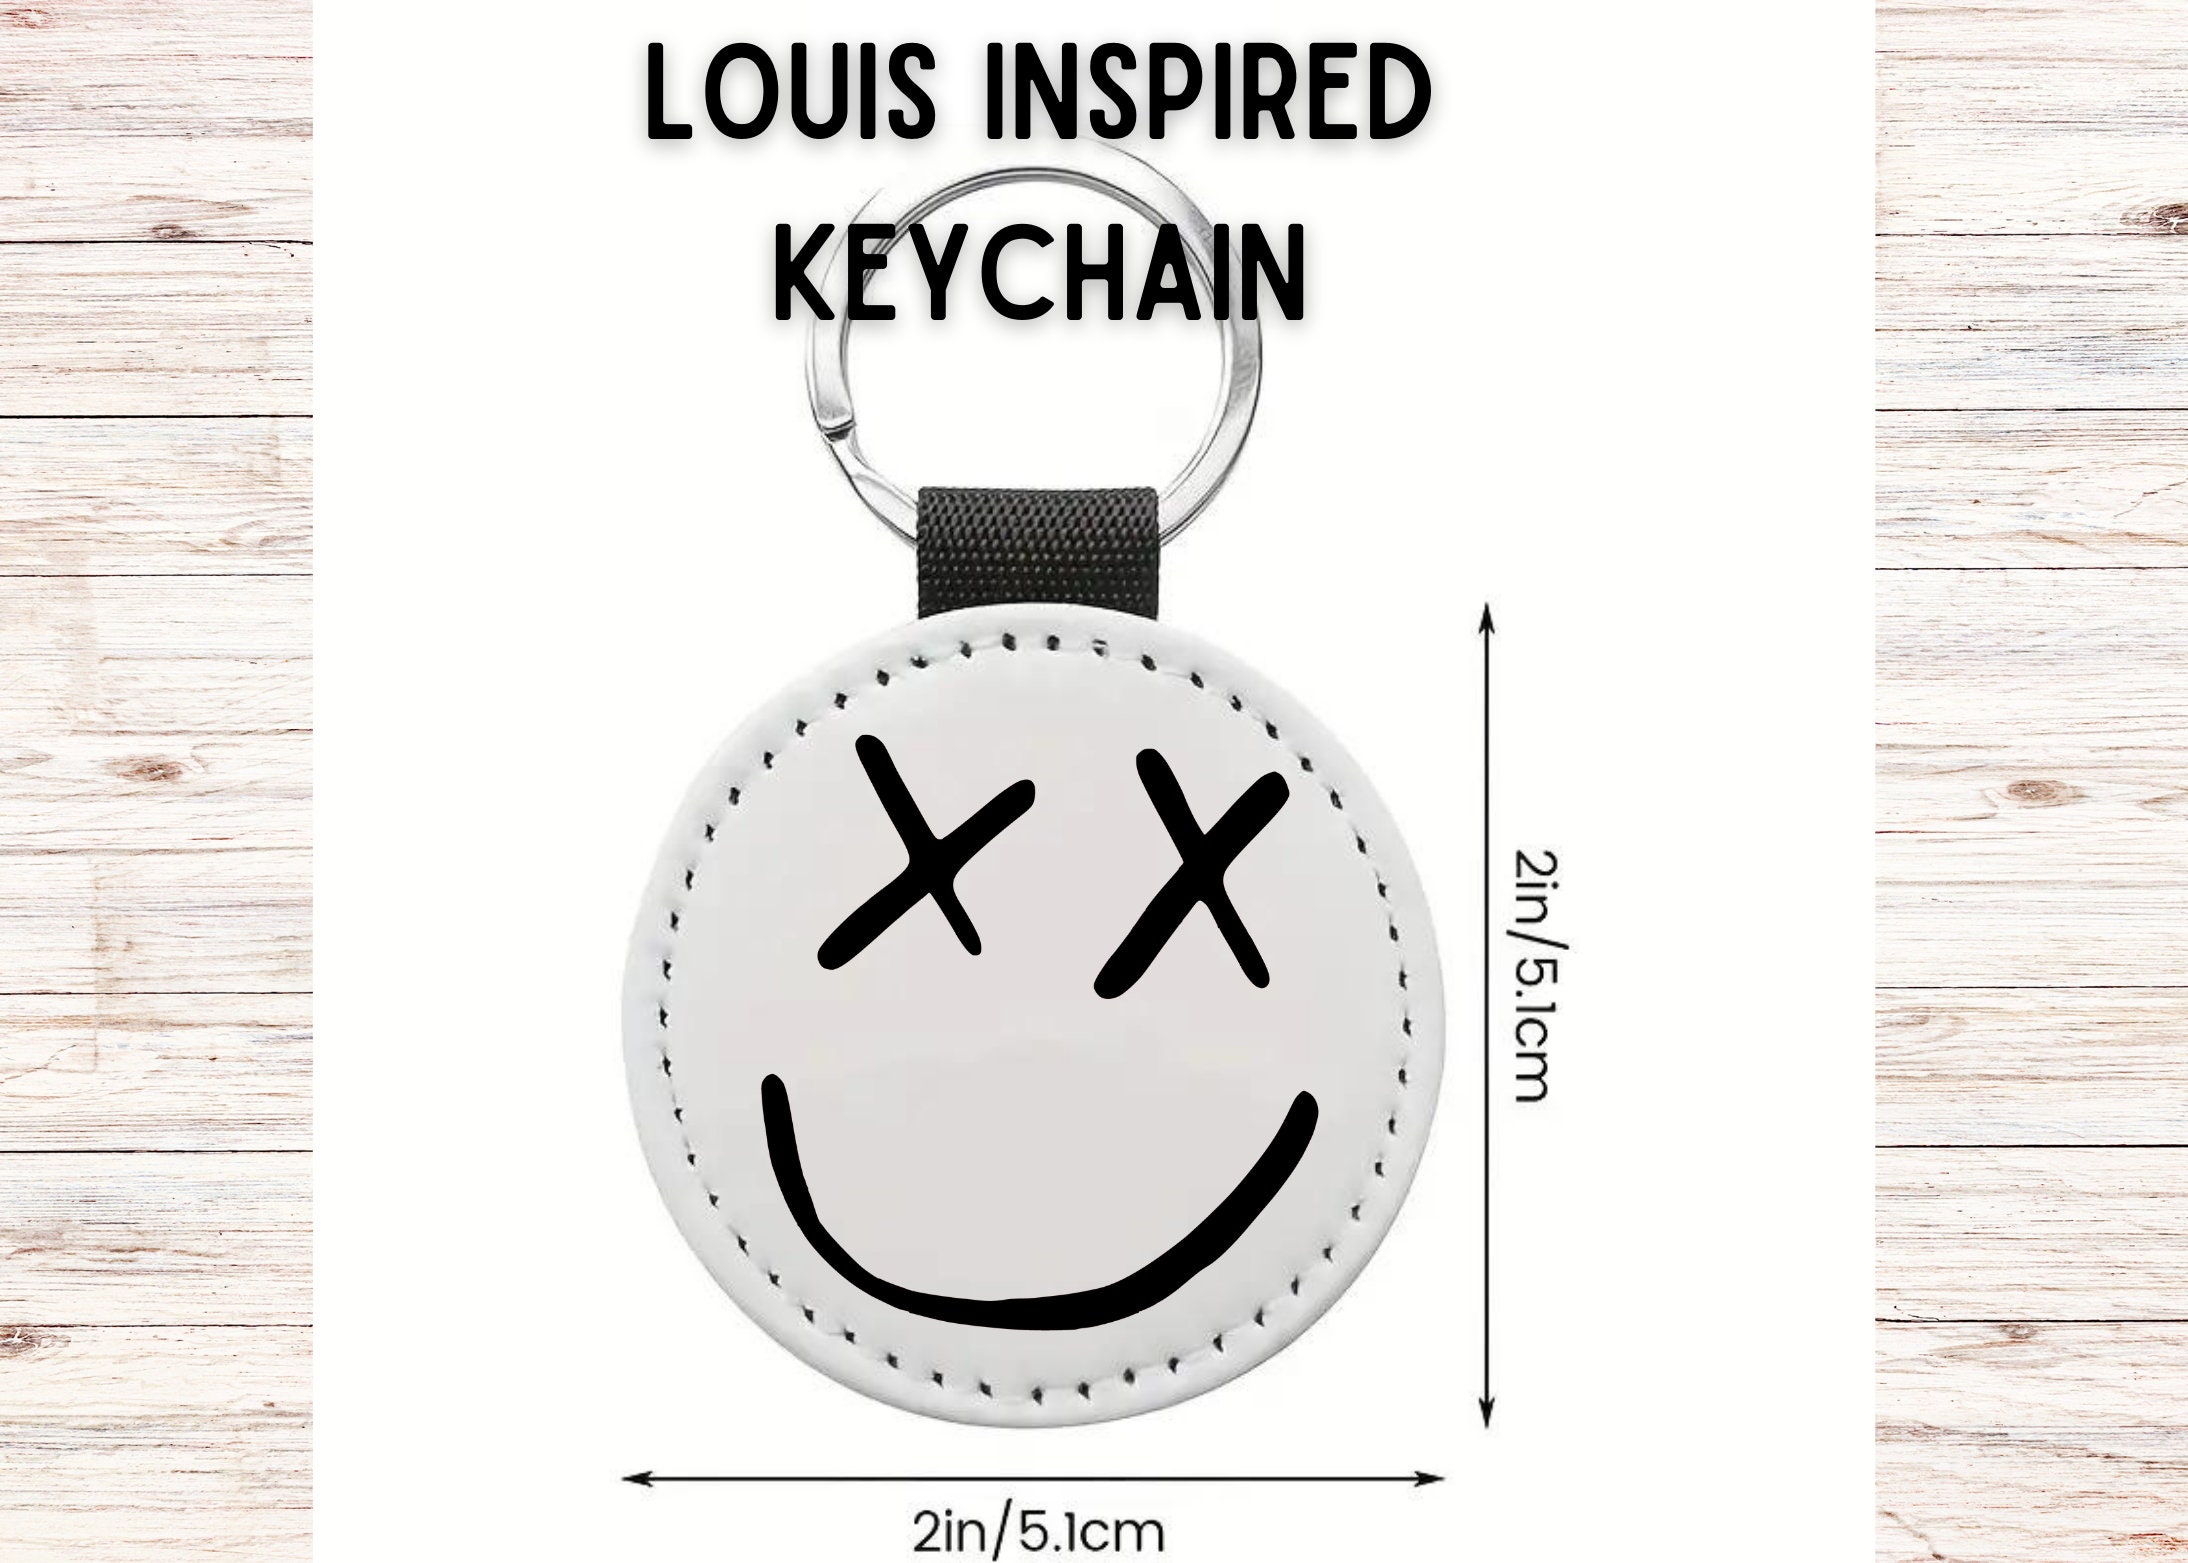 Louis Smiley Face Inspired Keychain One Direction Merch 